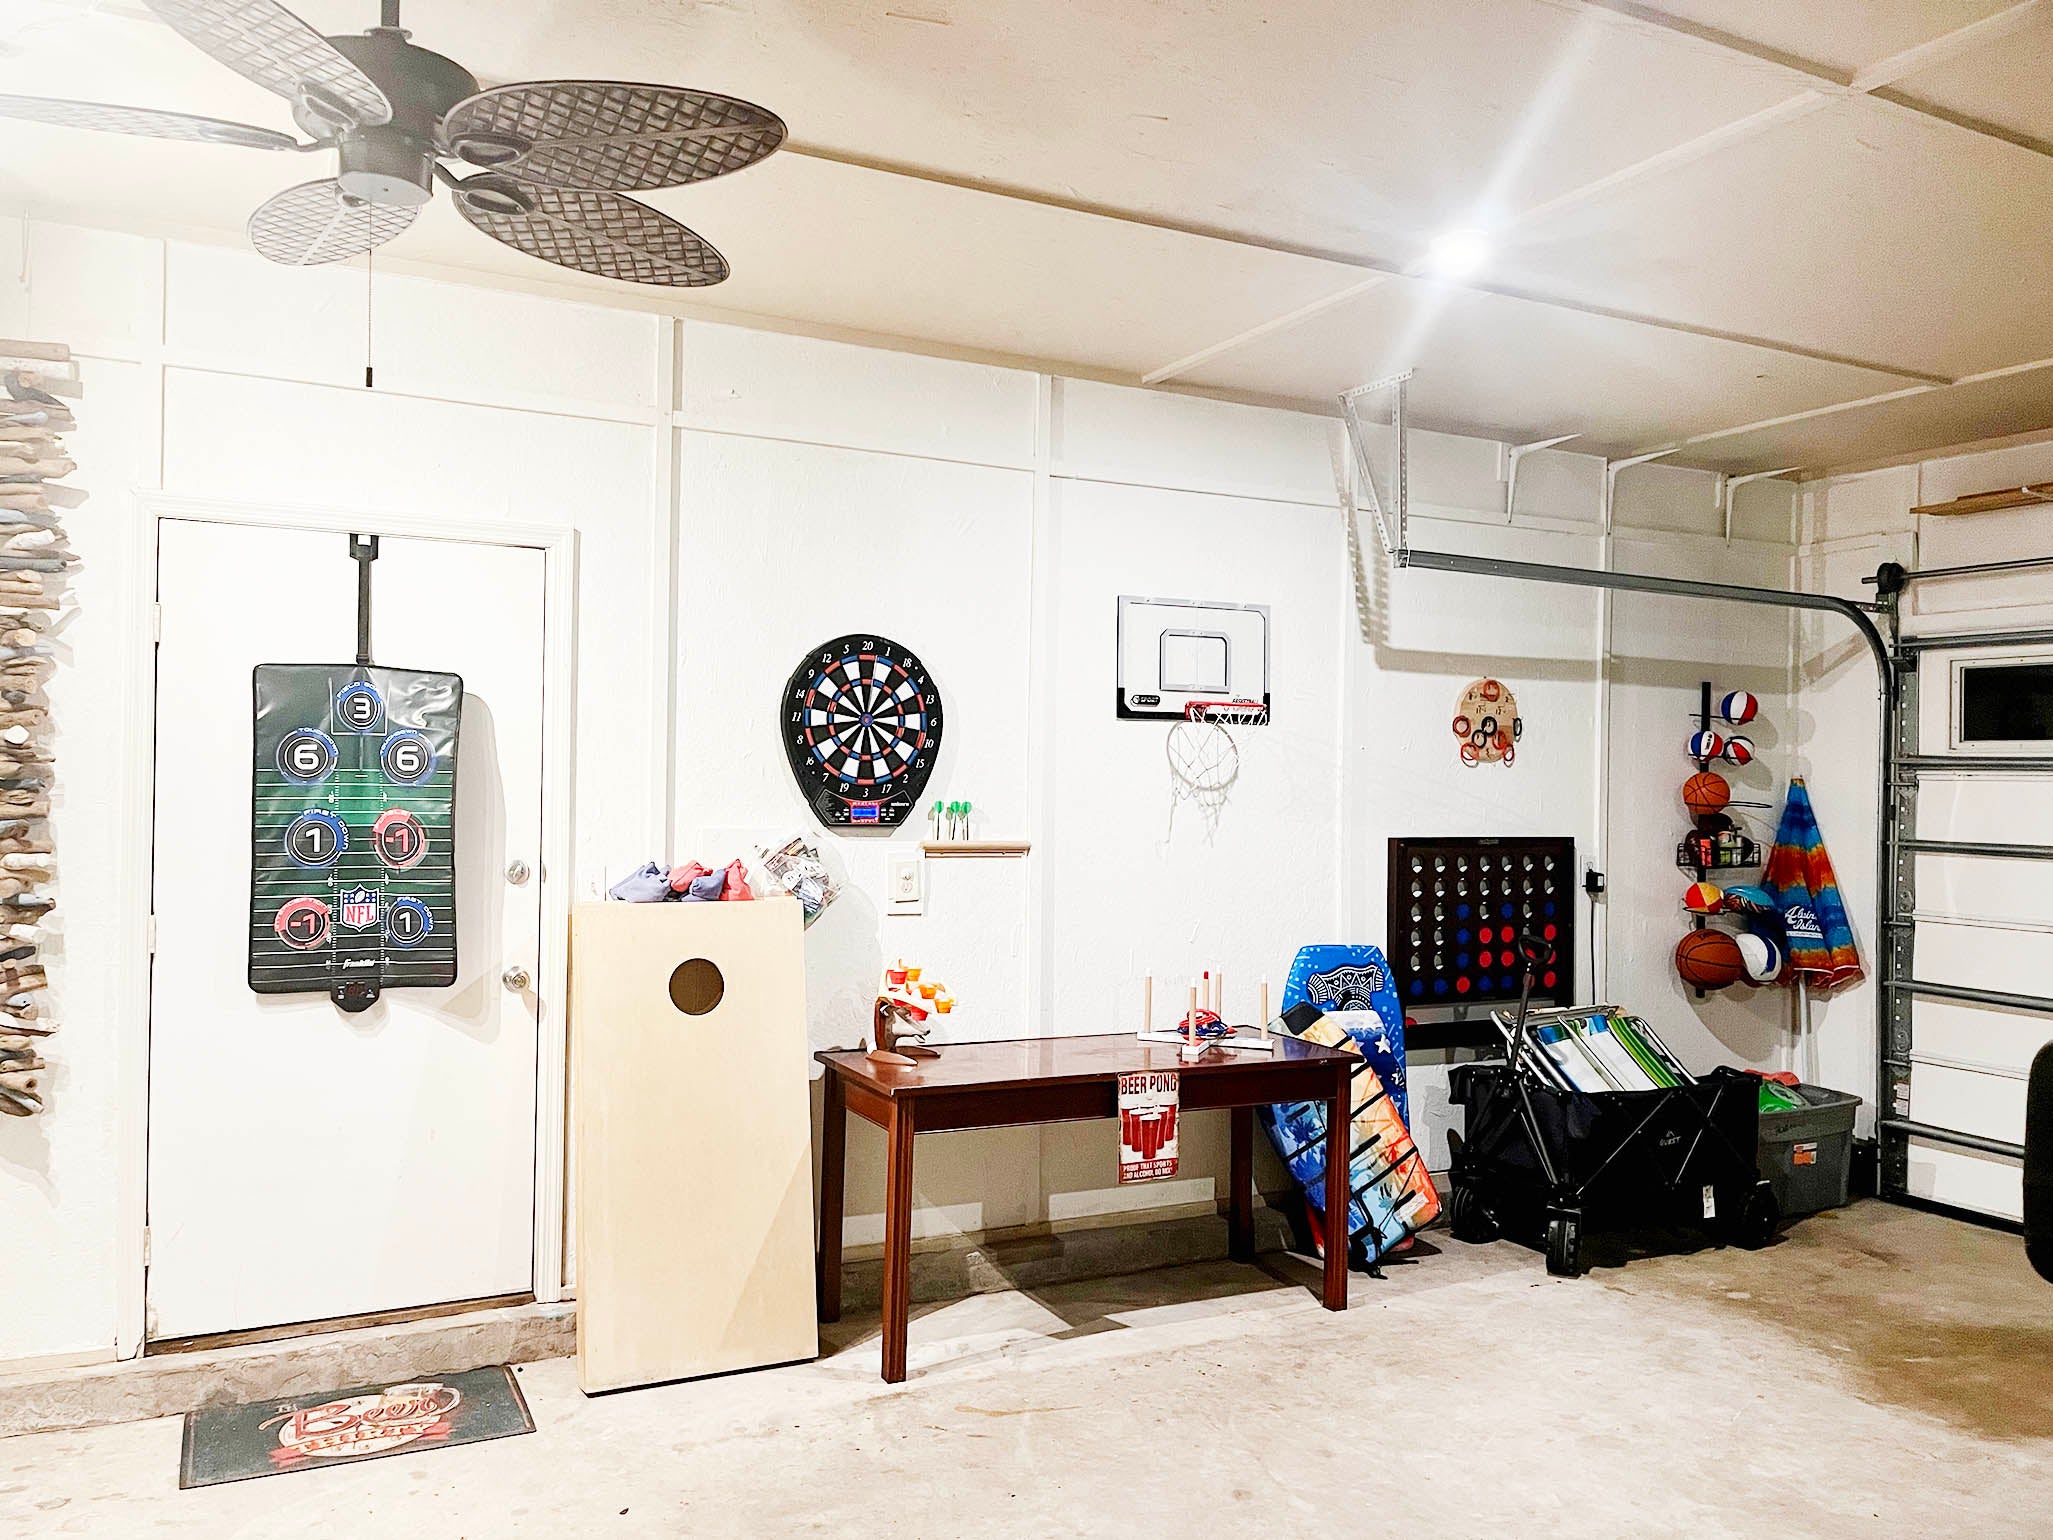 Games in the garage